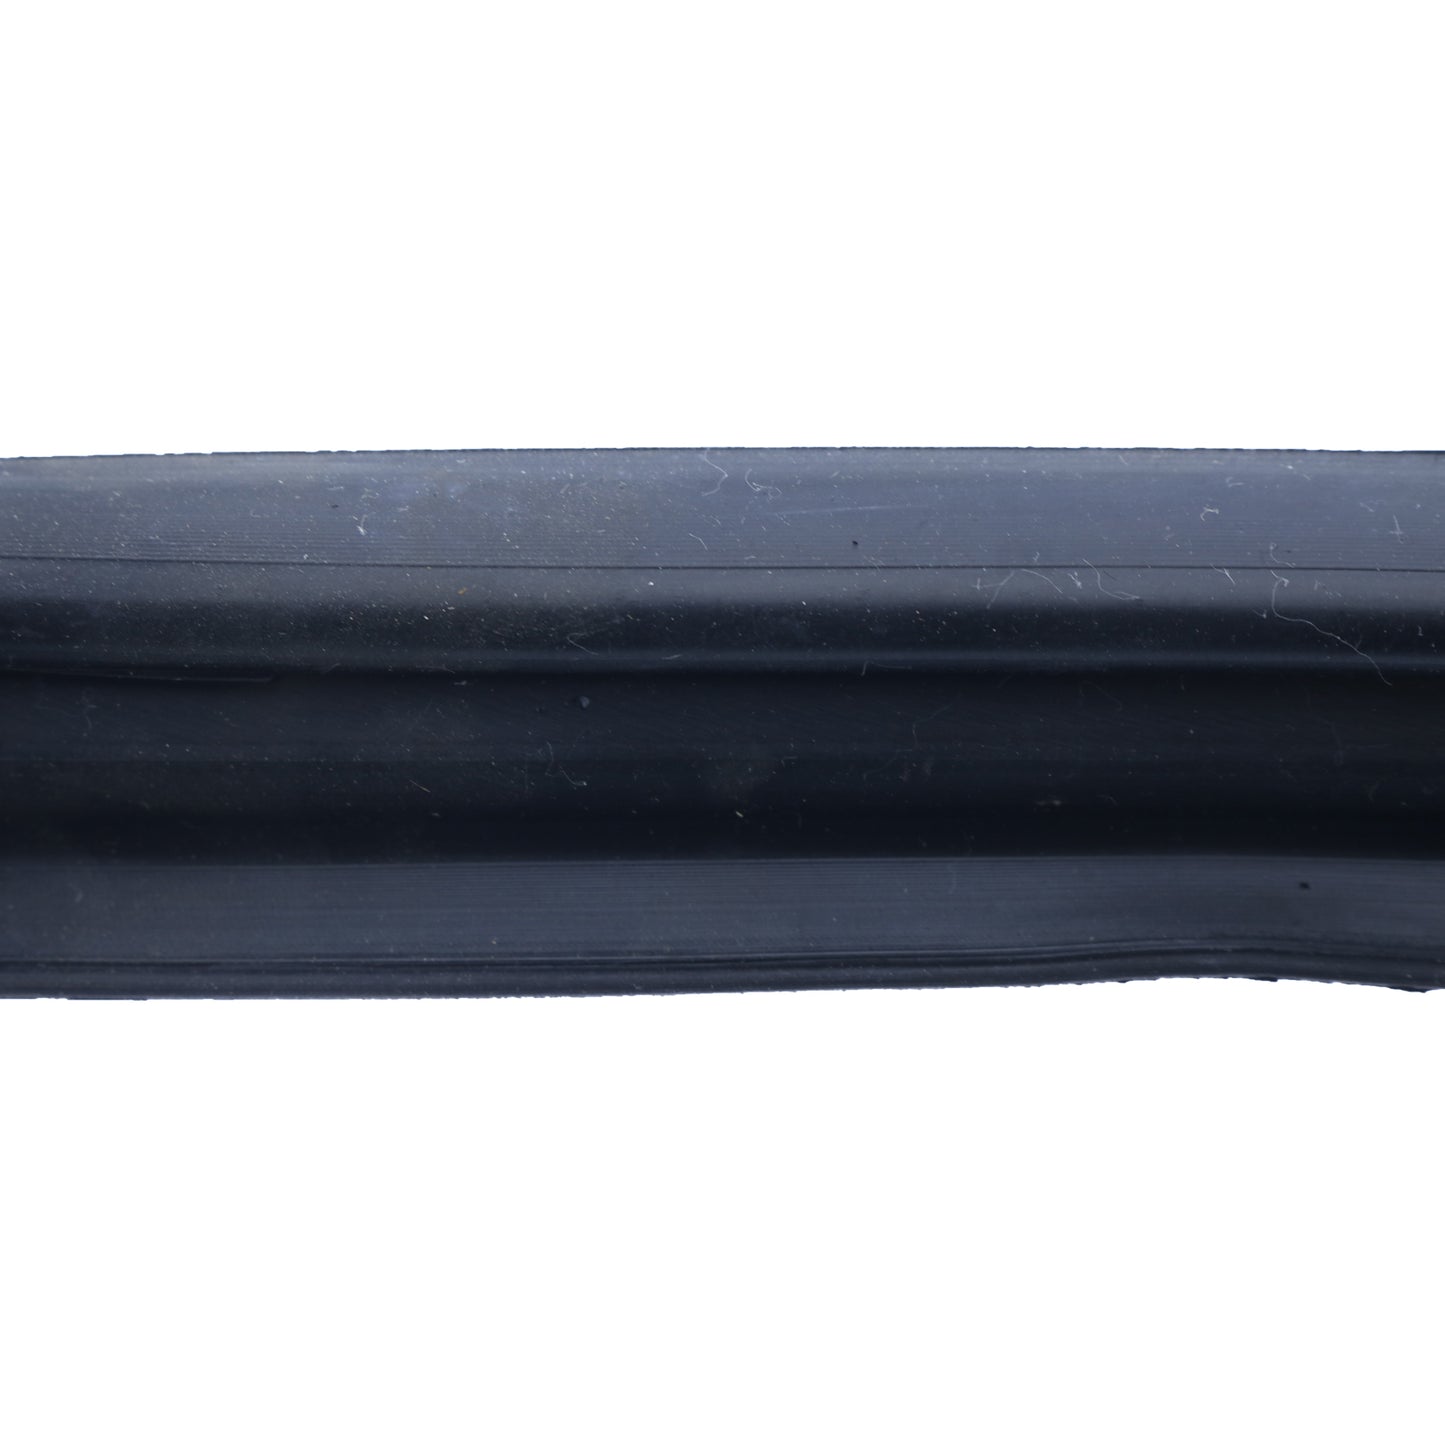 New Top Window Rubber Seal Compatible with Bobcat S220 S250 S300 S330 A220 A300 S100 S130 S150 S160 S175 S185 S205